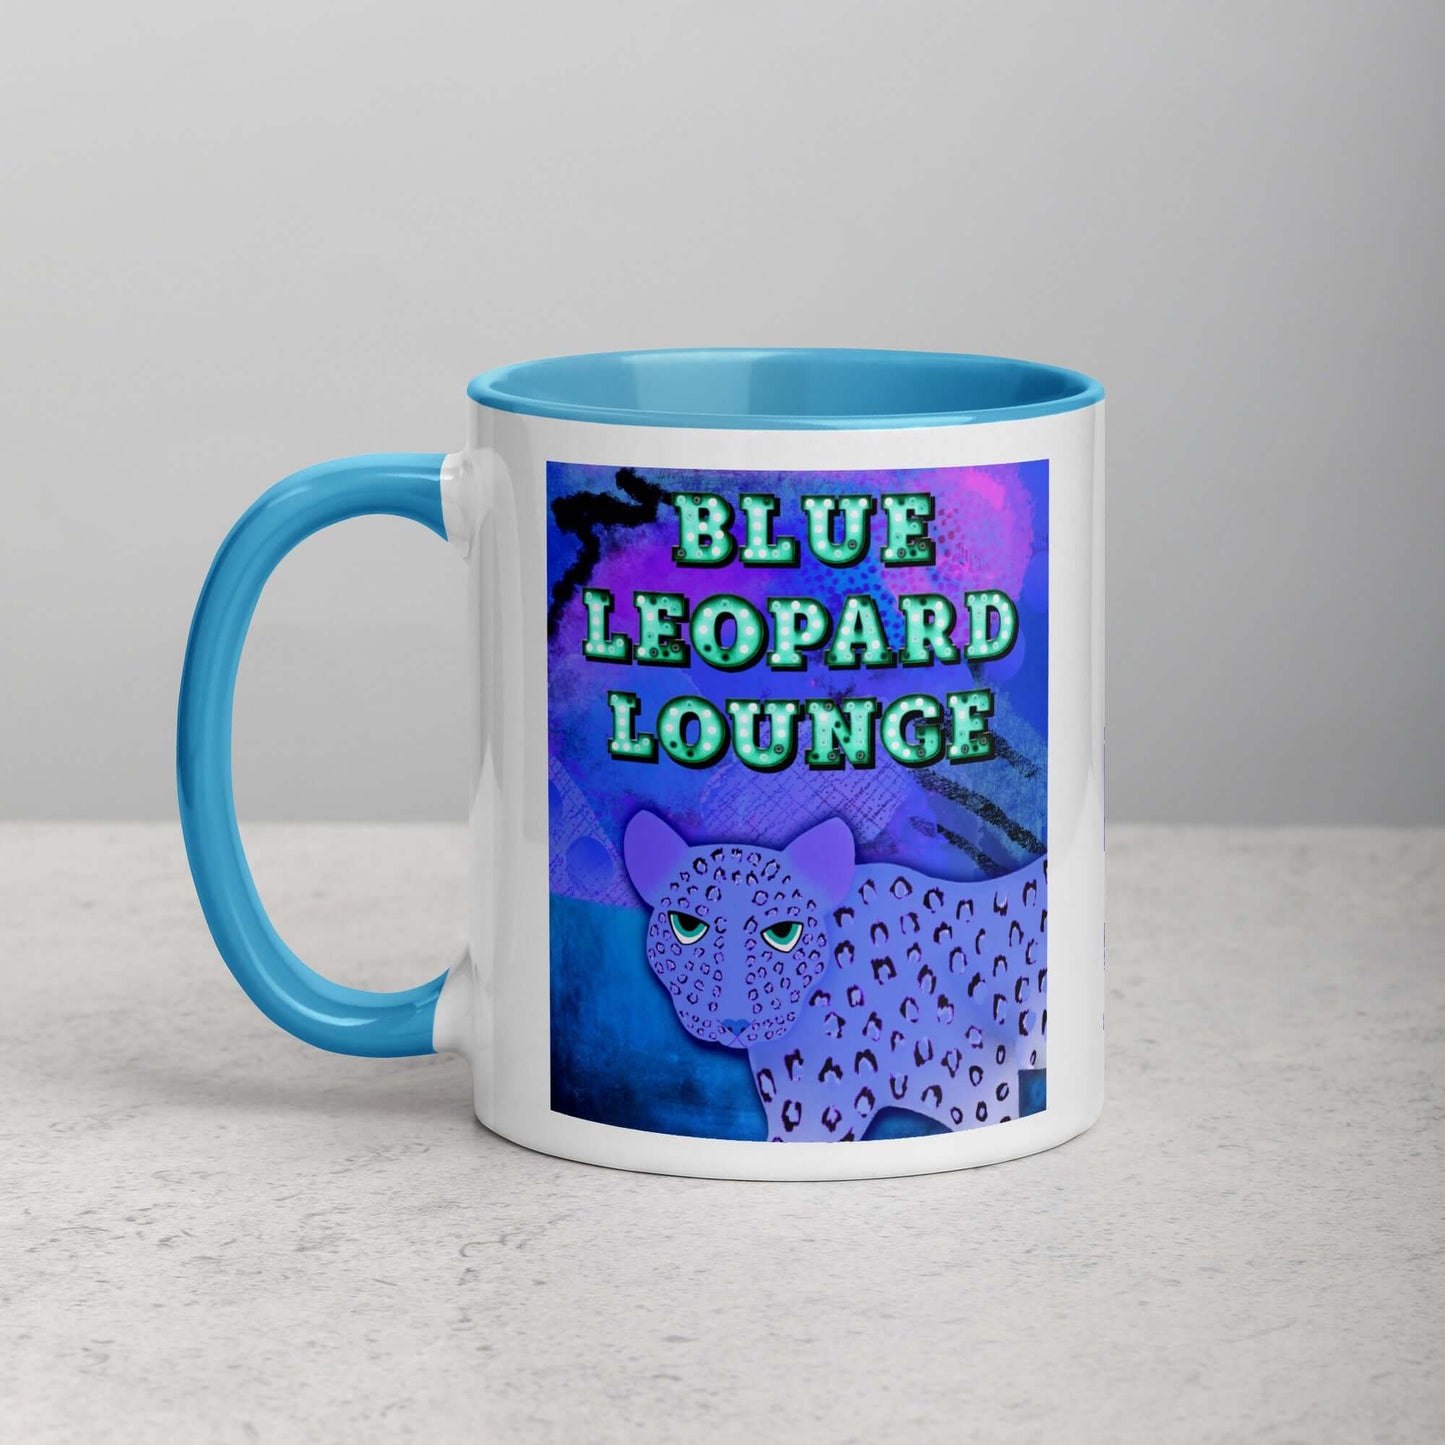 Purple Leopard on Blue and Purple Abstract Background with Text “Blue Leopard Lounge” Mug with Light Blue Color Inside Left Handed Front View